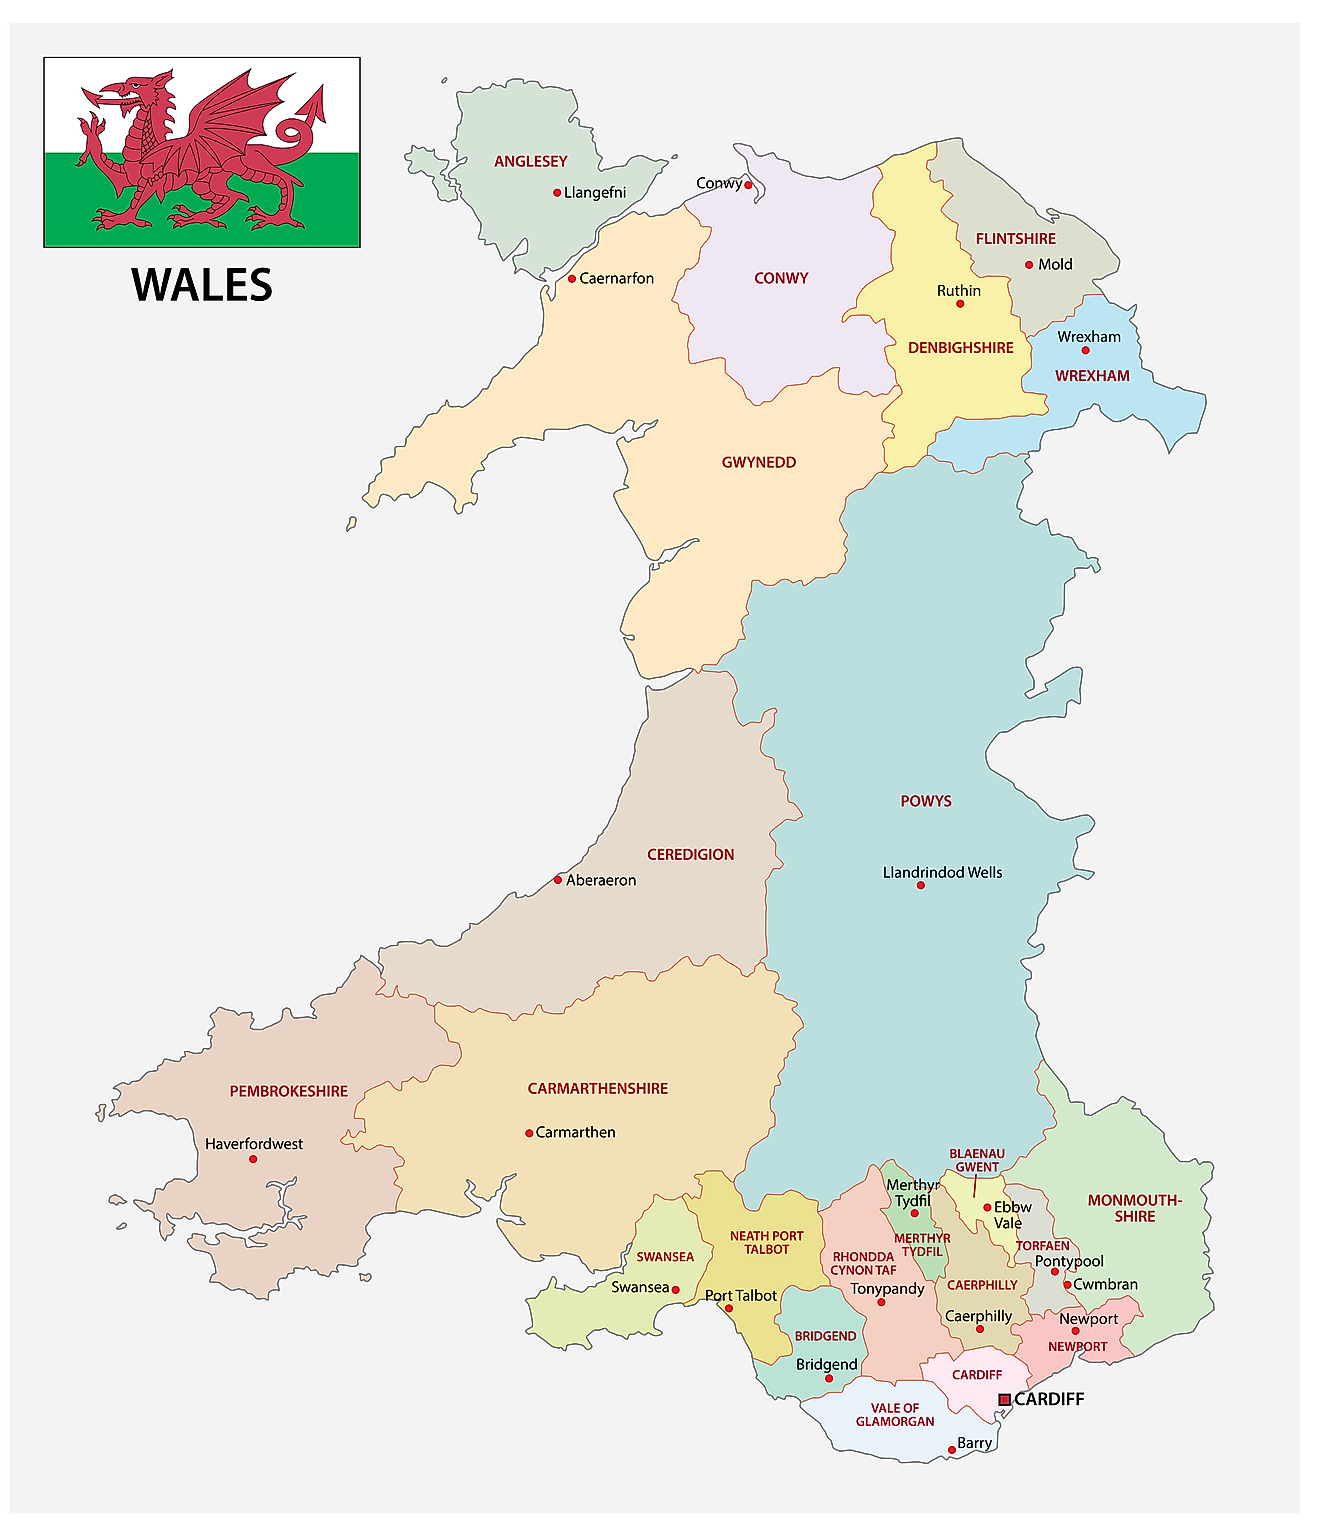 Administrative Map of Wales showing its various unitary authorities and its capital city - Cardiff